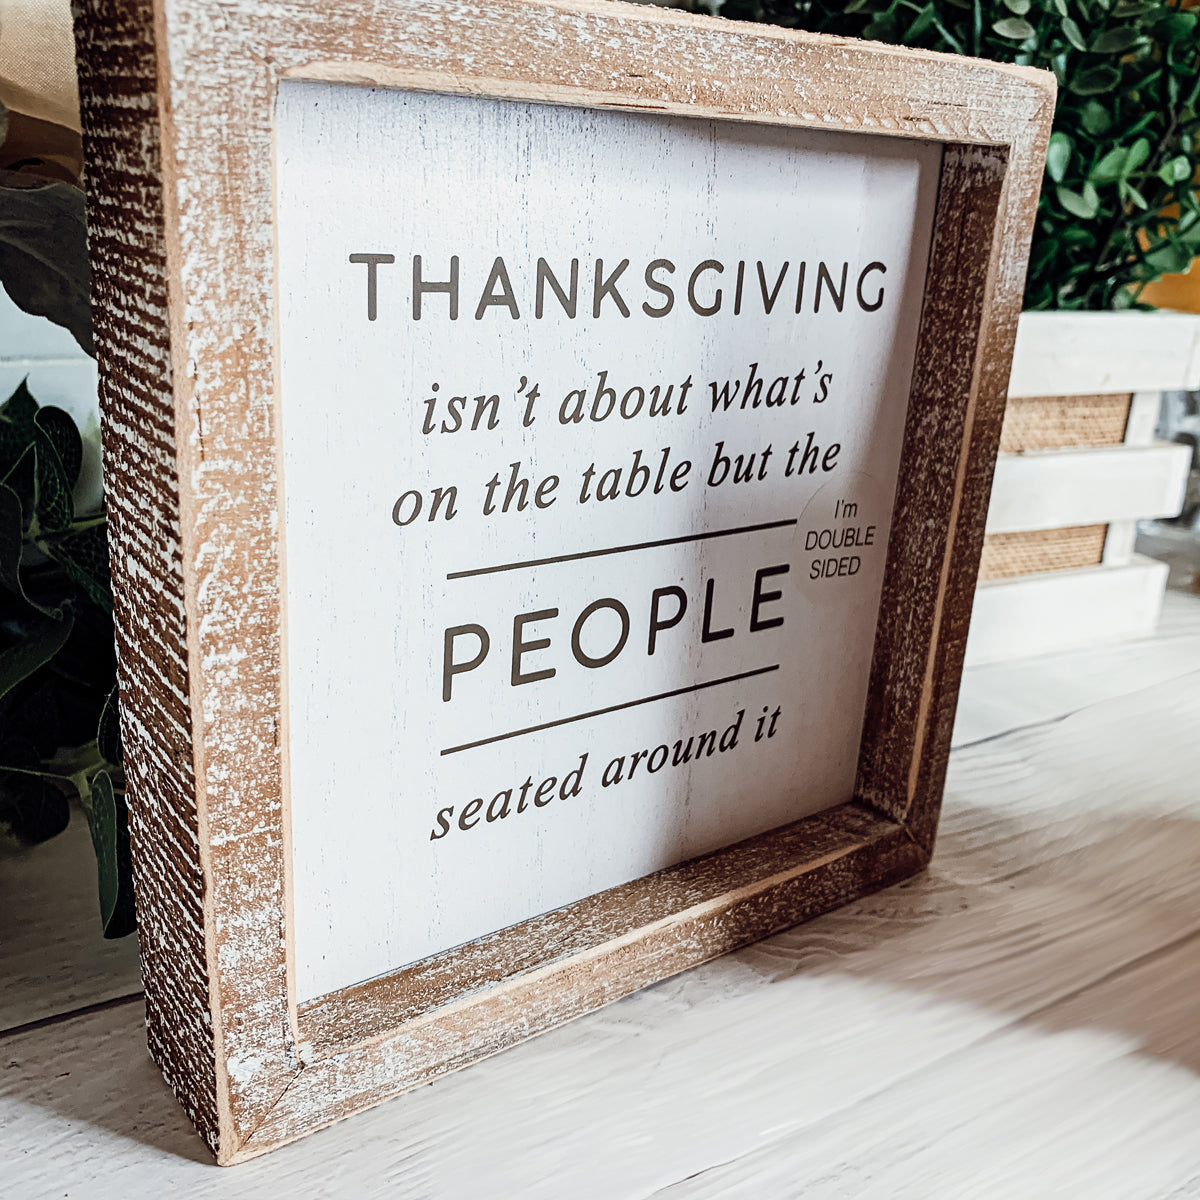 Thanksgiving isn't about what's on the table but the people seated around it sign